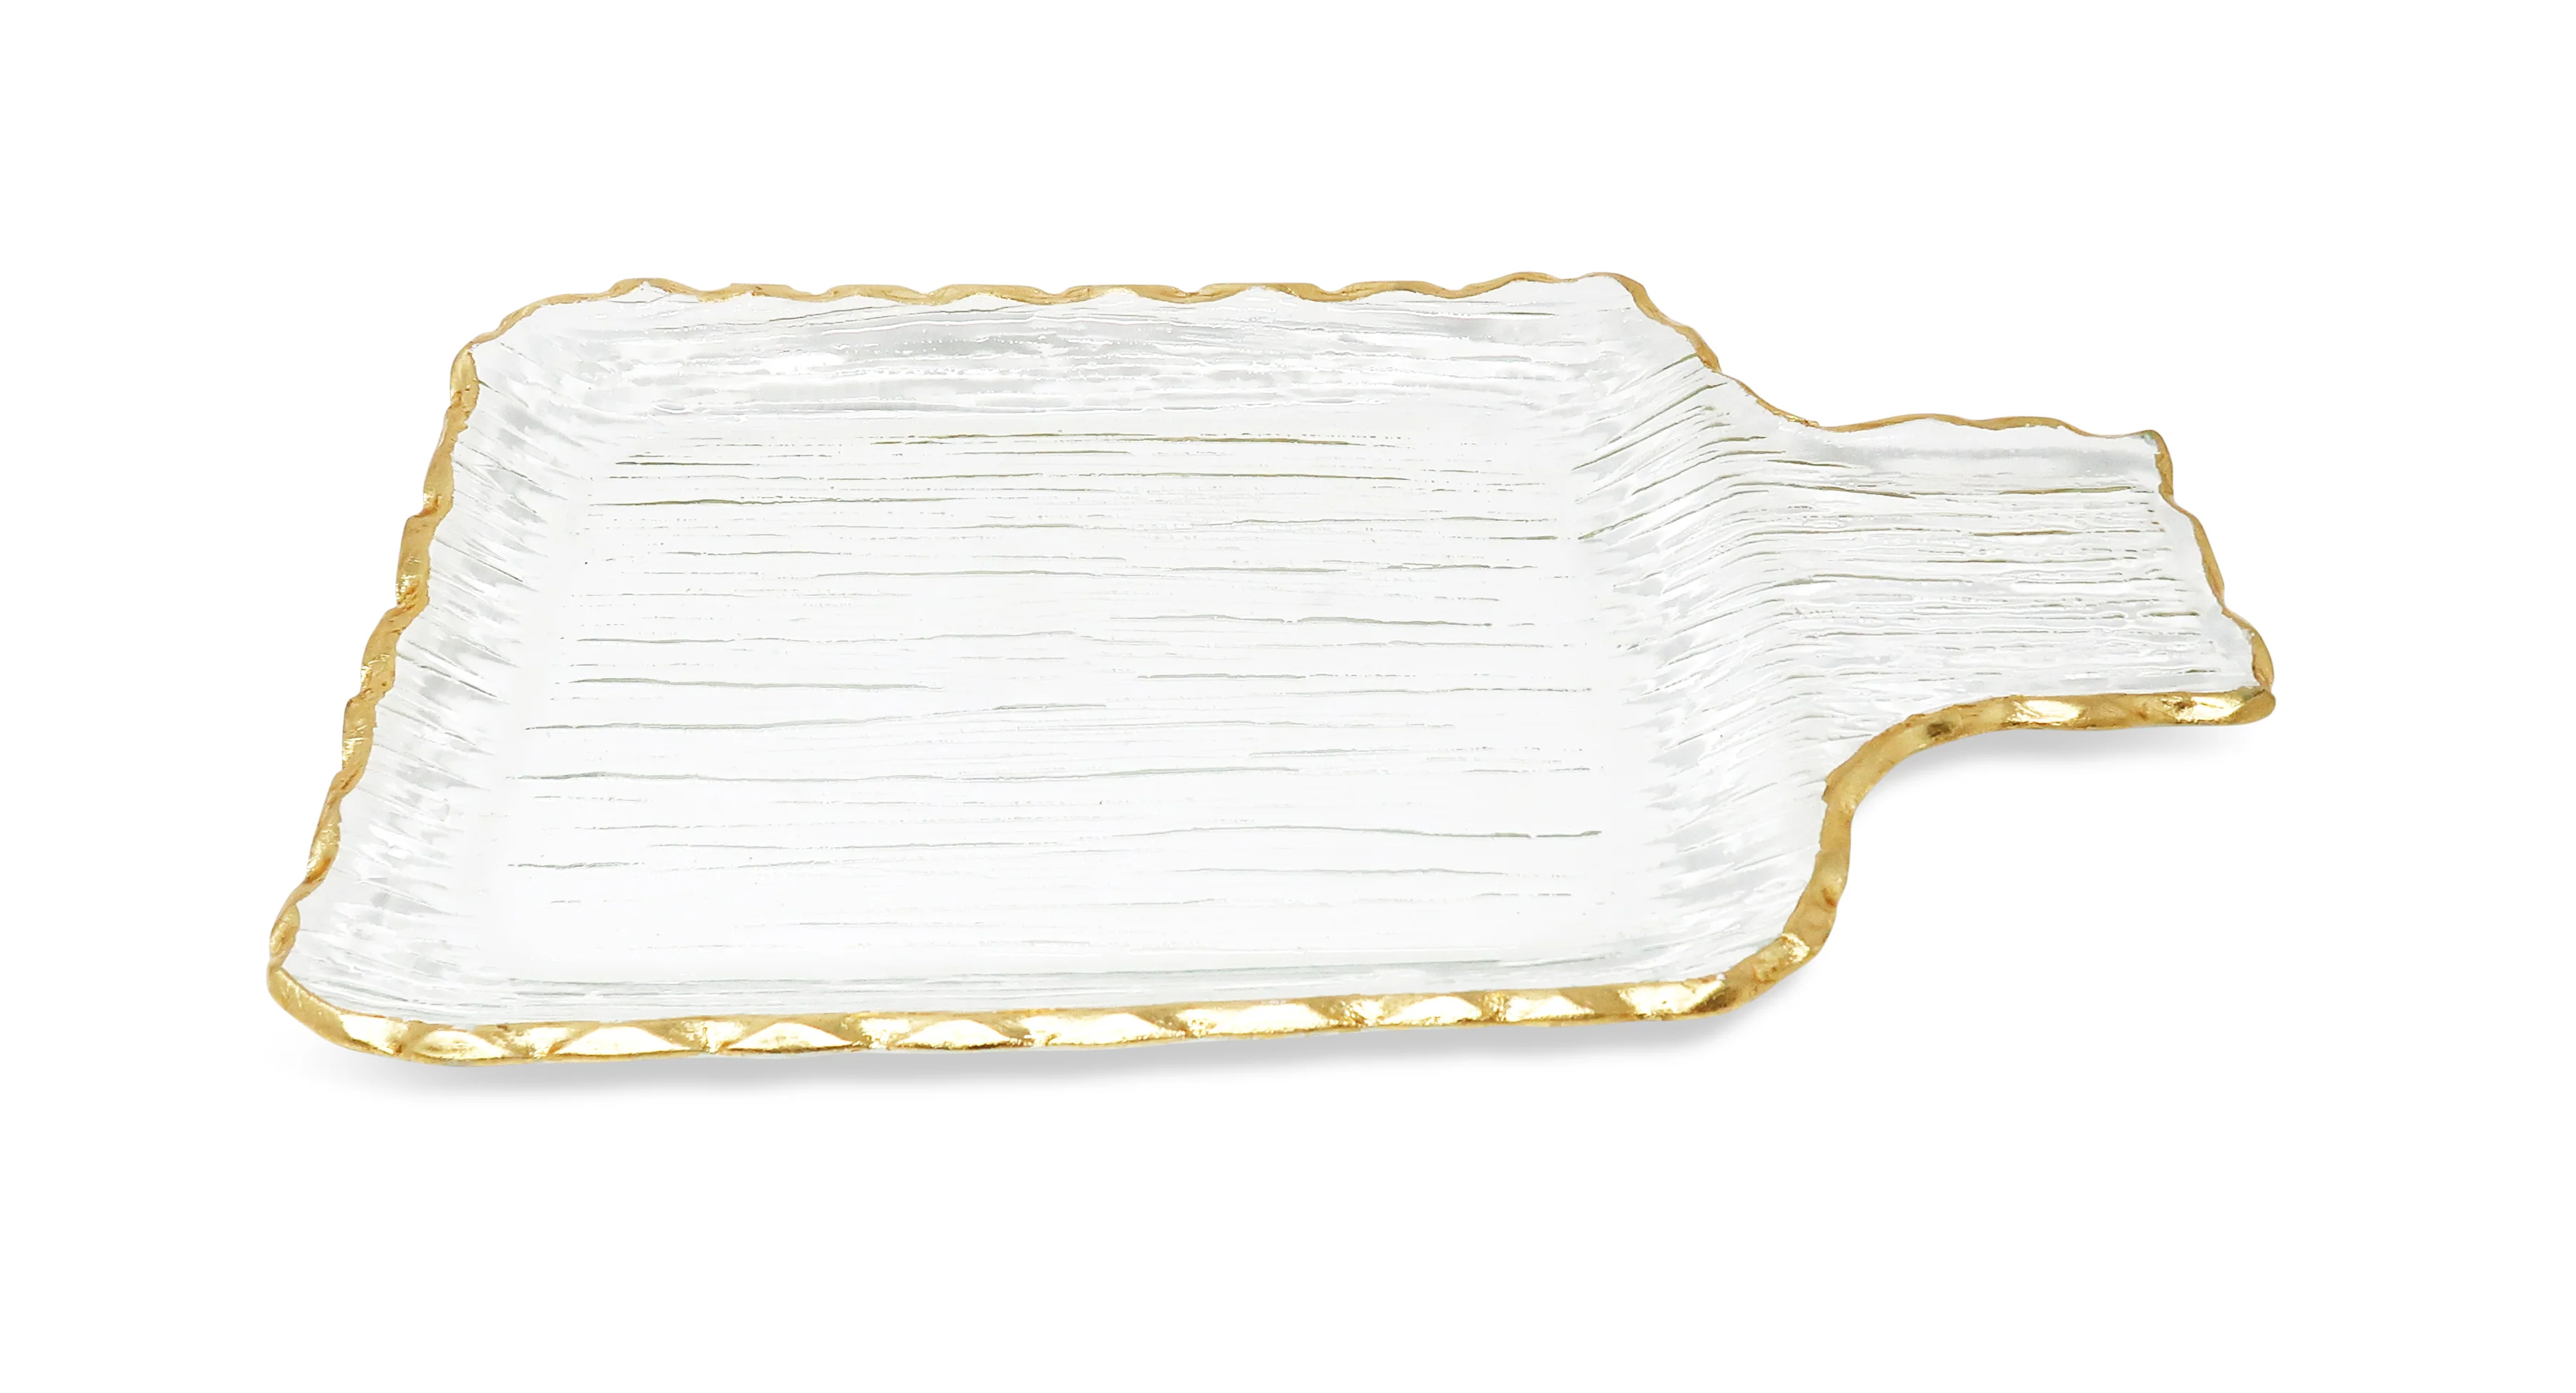 Glass Square Tray with Gold Boarder Med Size